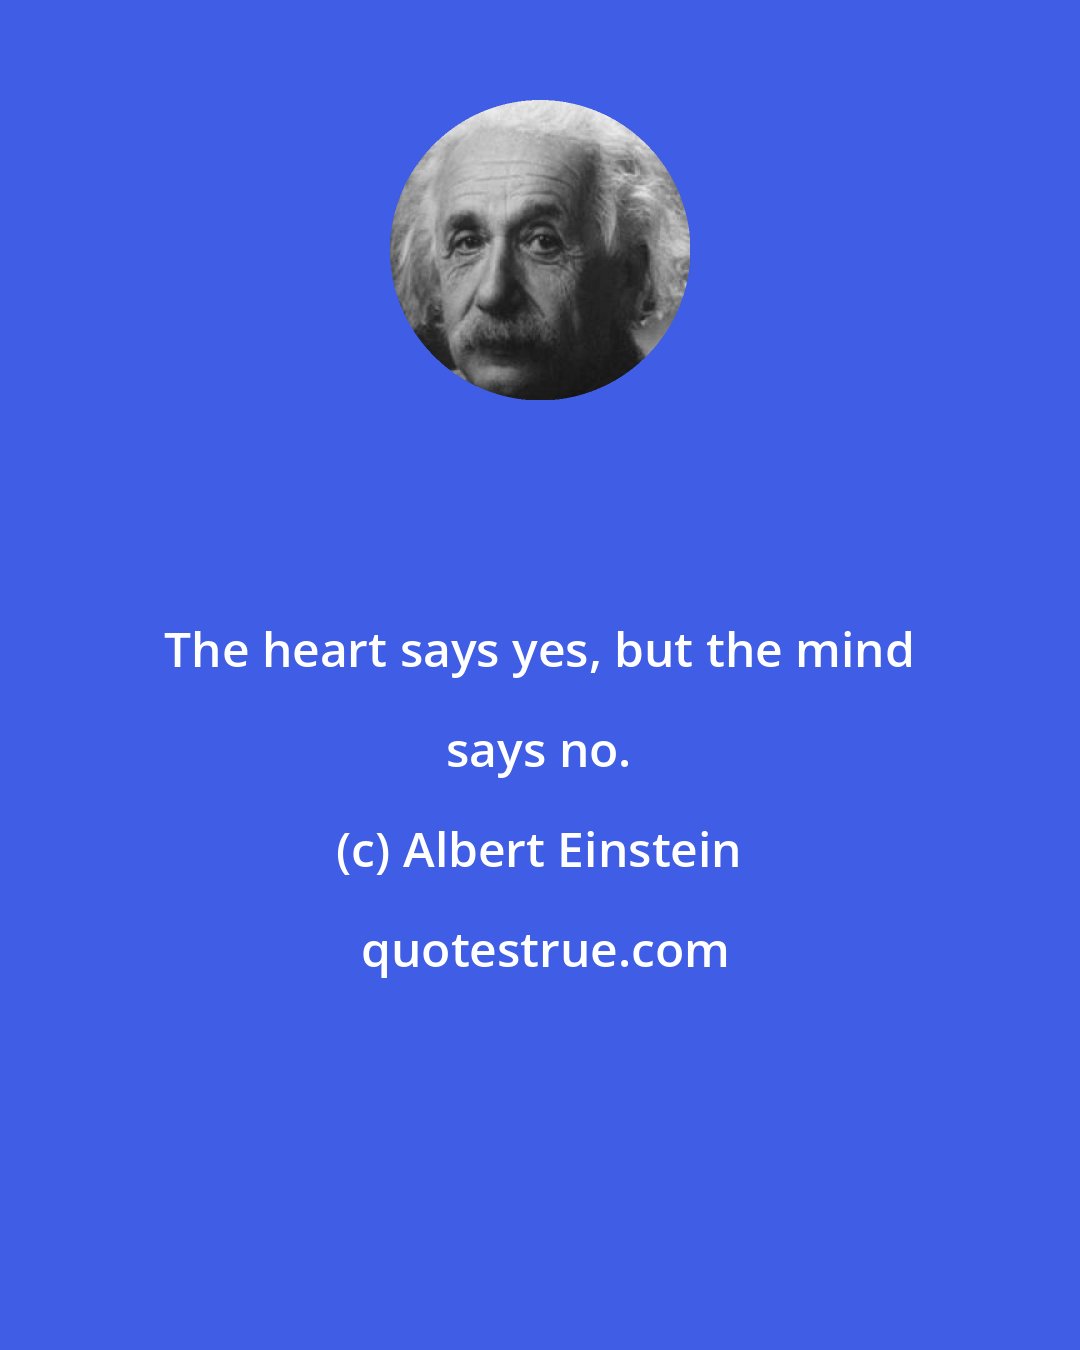 Albert Einstein: The heart says yes, but the mind says no.